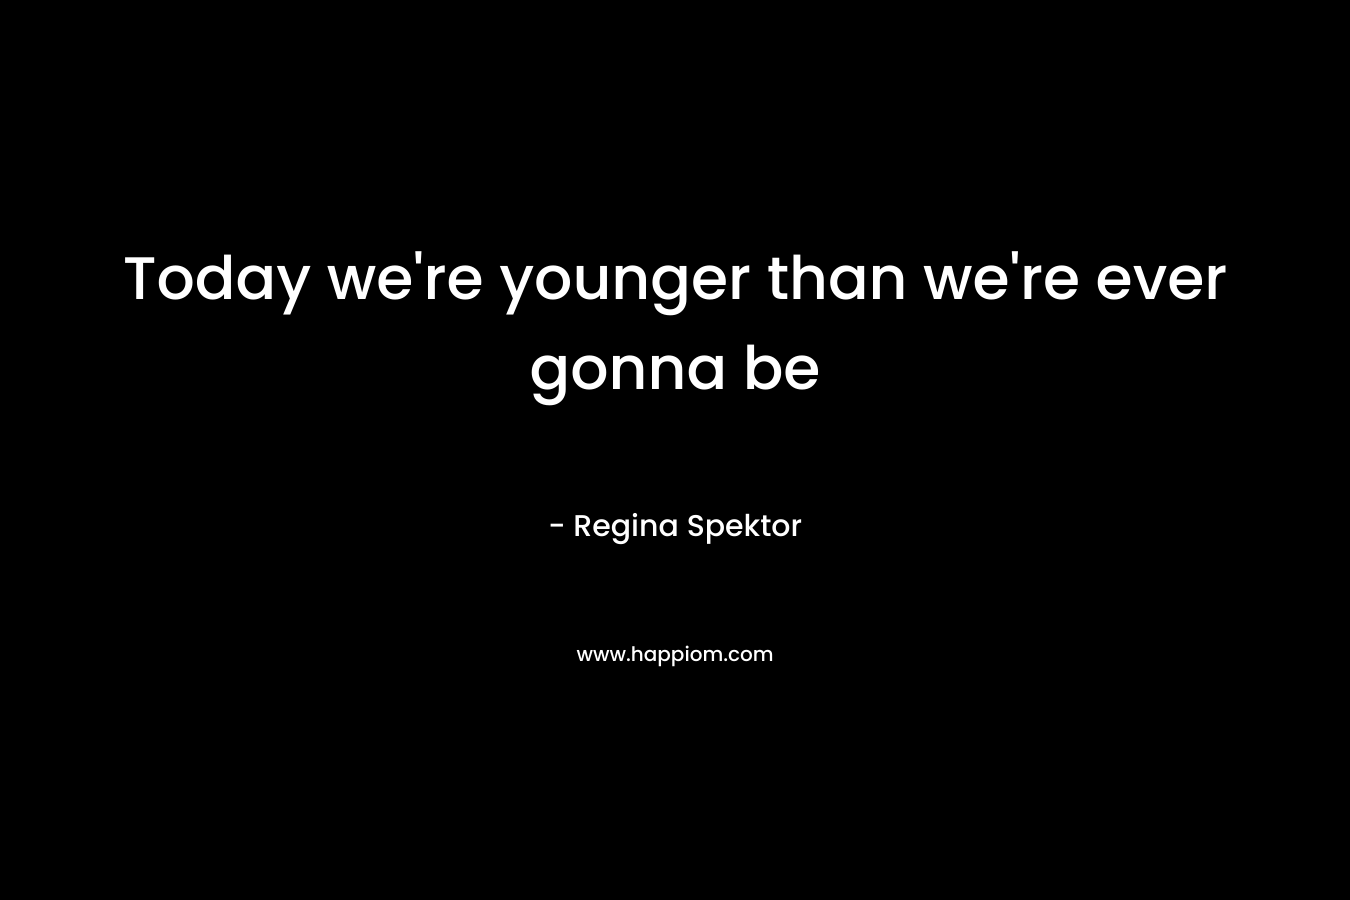 Today we're younger than we're ever gonna be